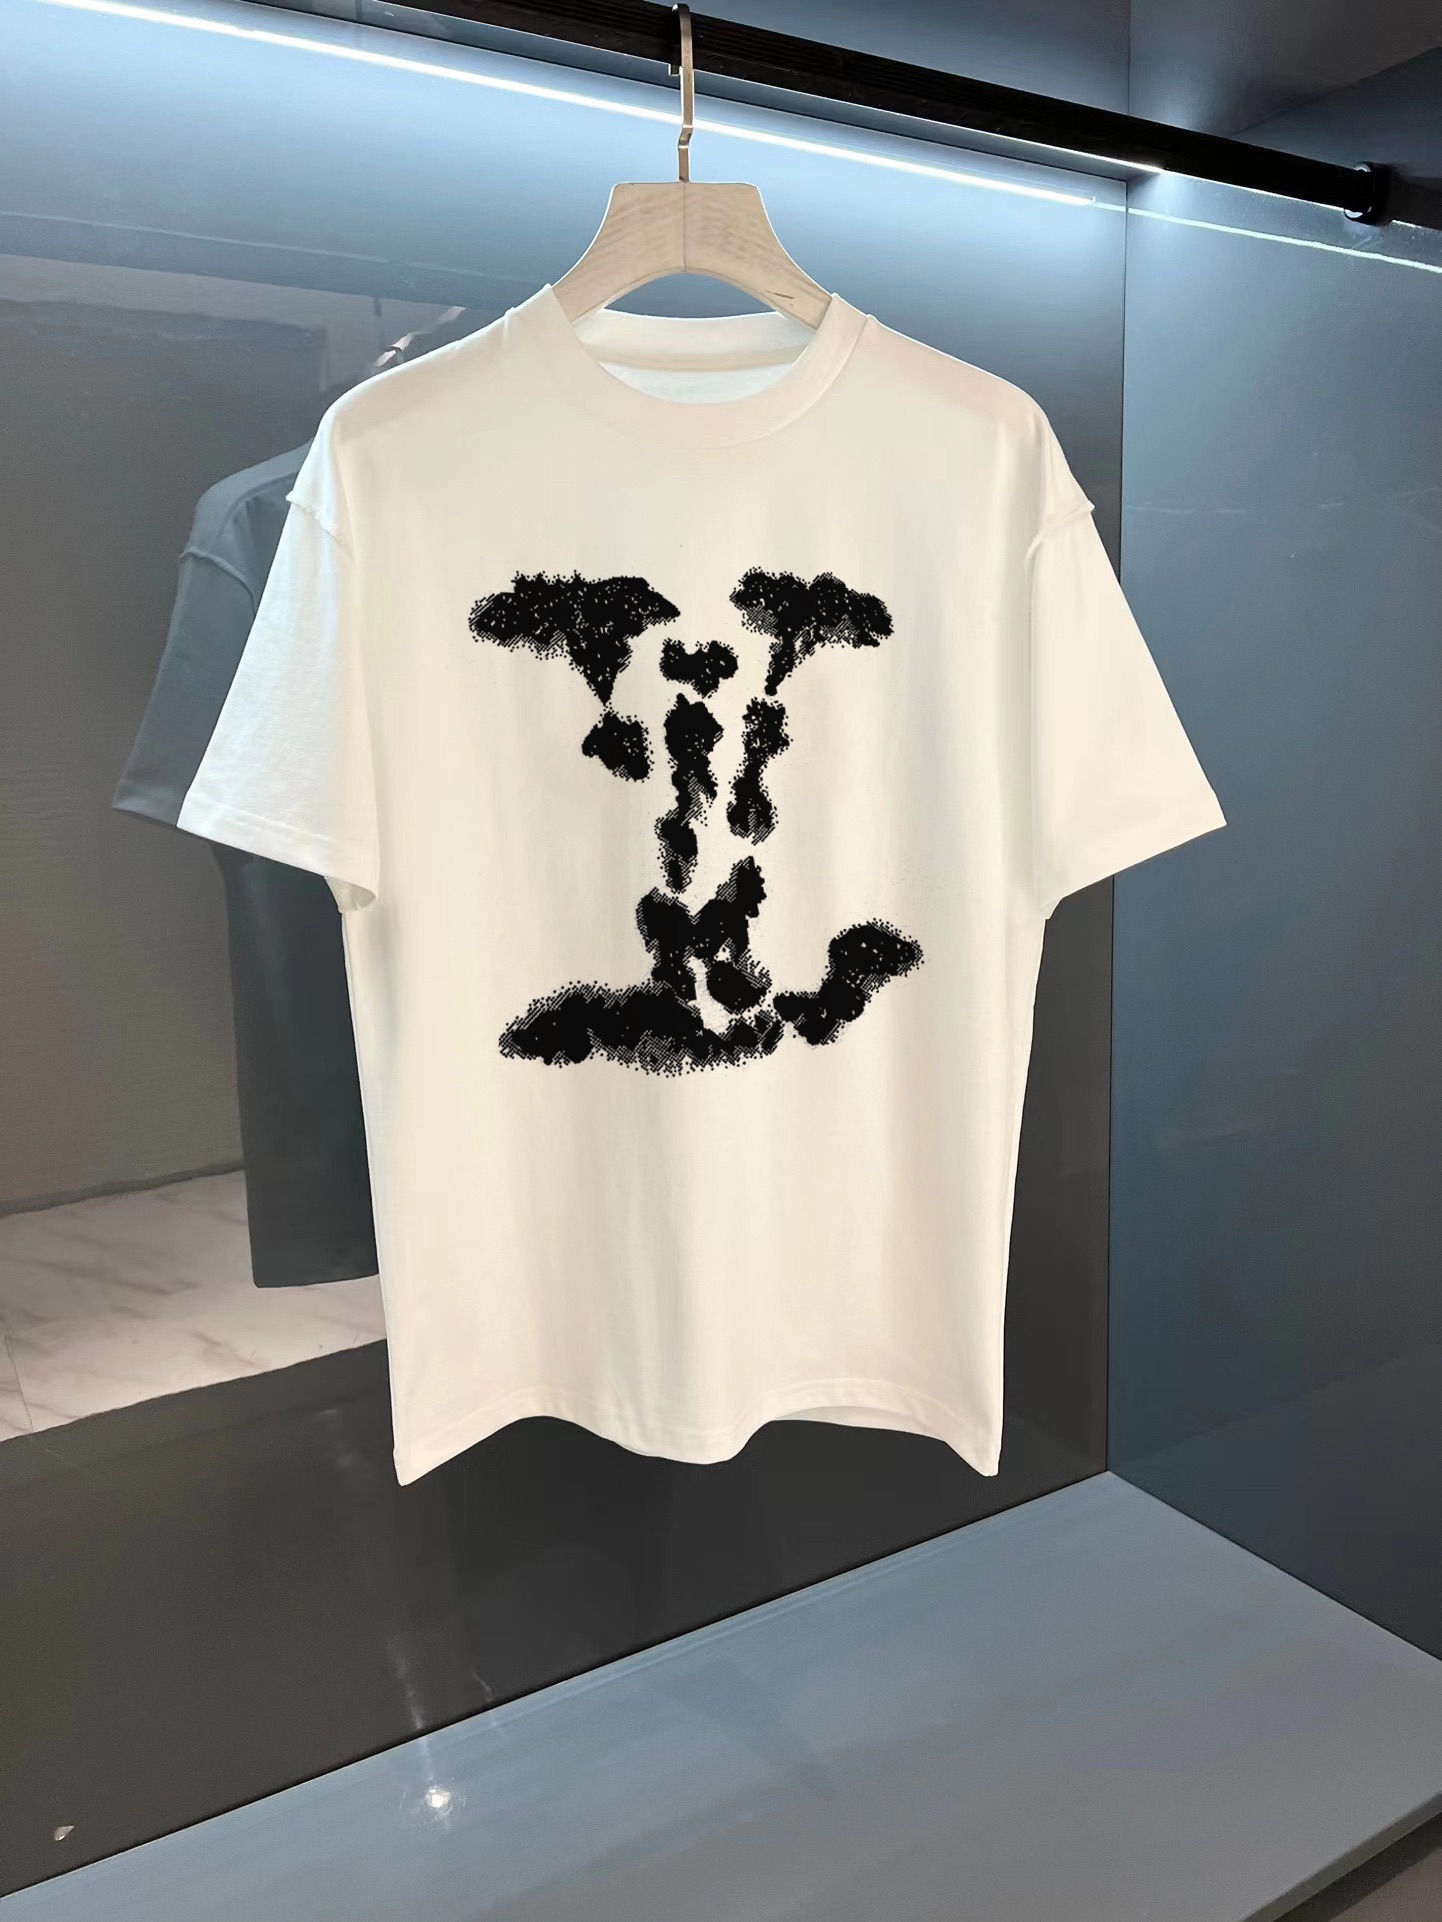 Louis Vuitton Clothing T-Shirt Black White Embroidery Short Sleeve